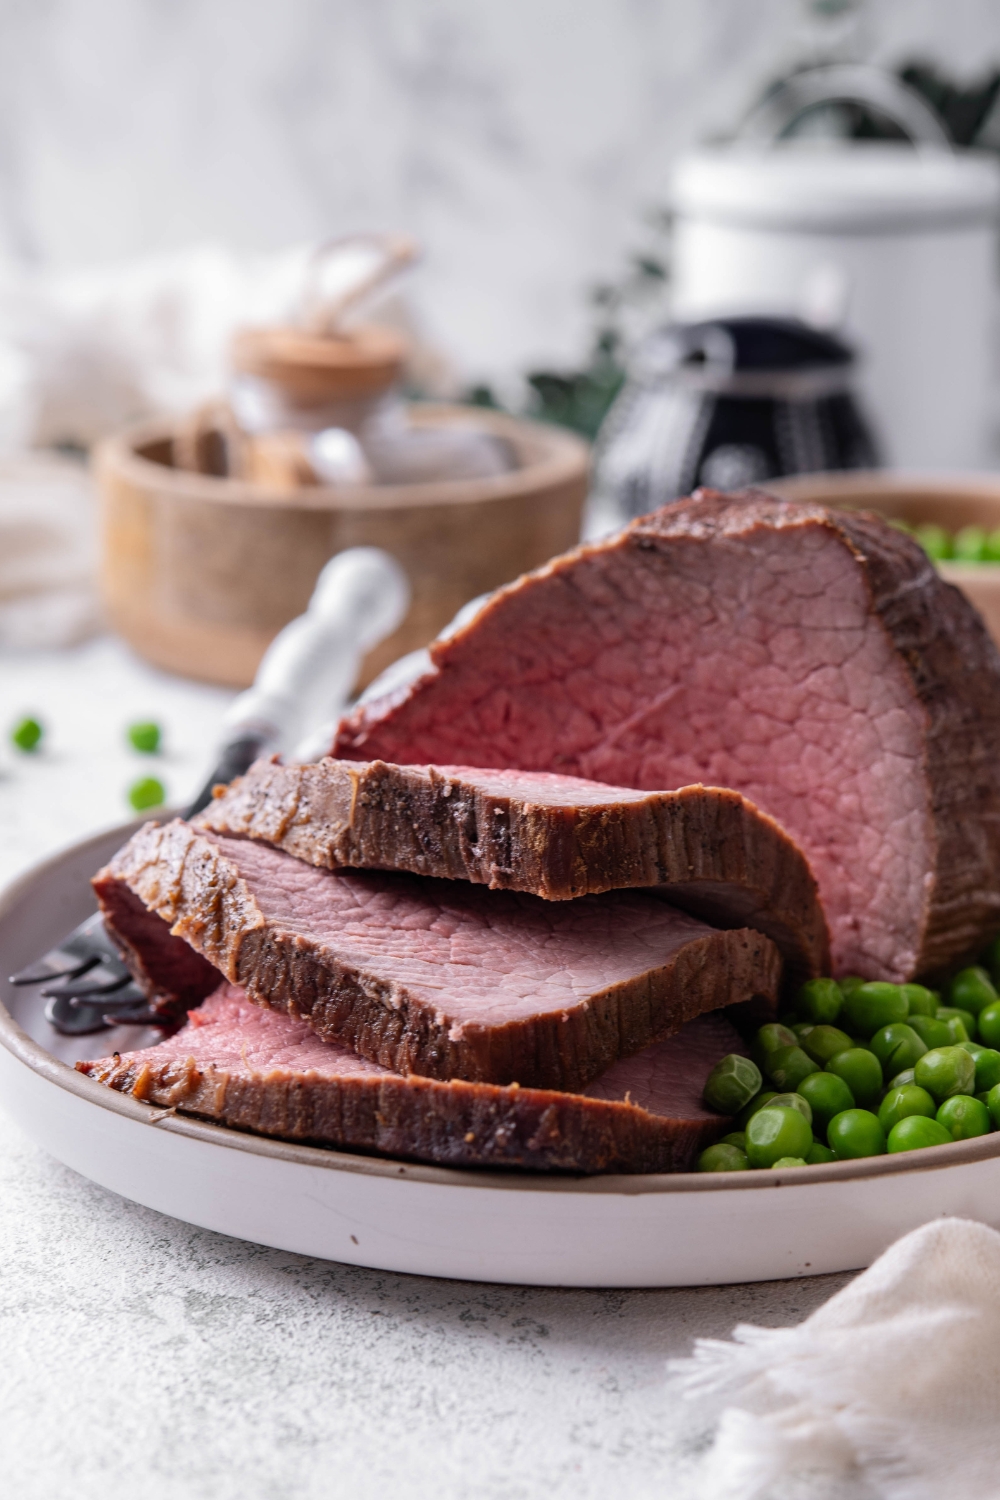 A medium rare rump roast is in a white shallow dish. Three thick slices of roast have been cut from it. Peas and silverware are on the plate.